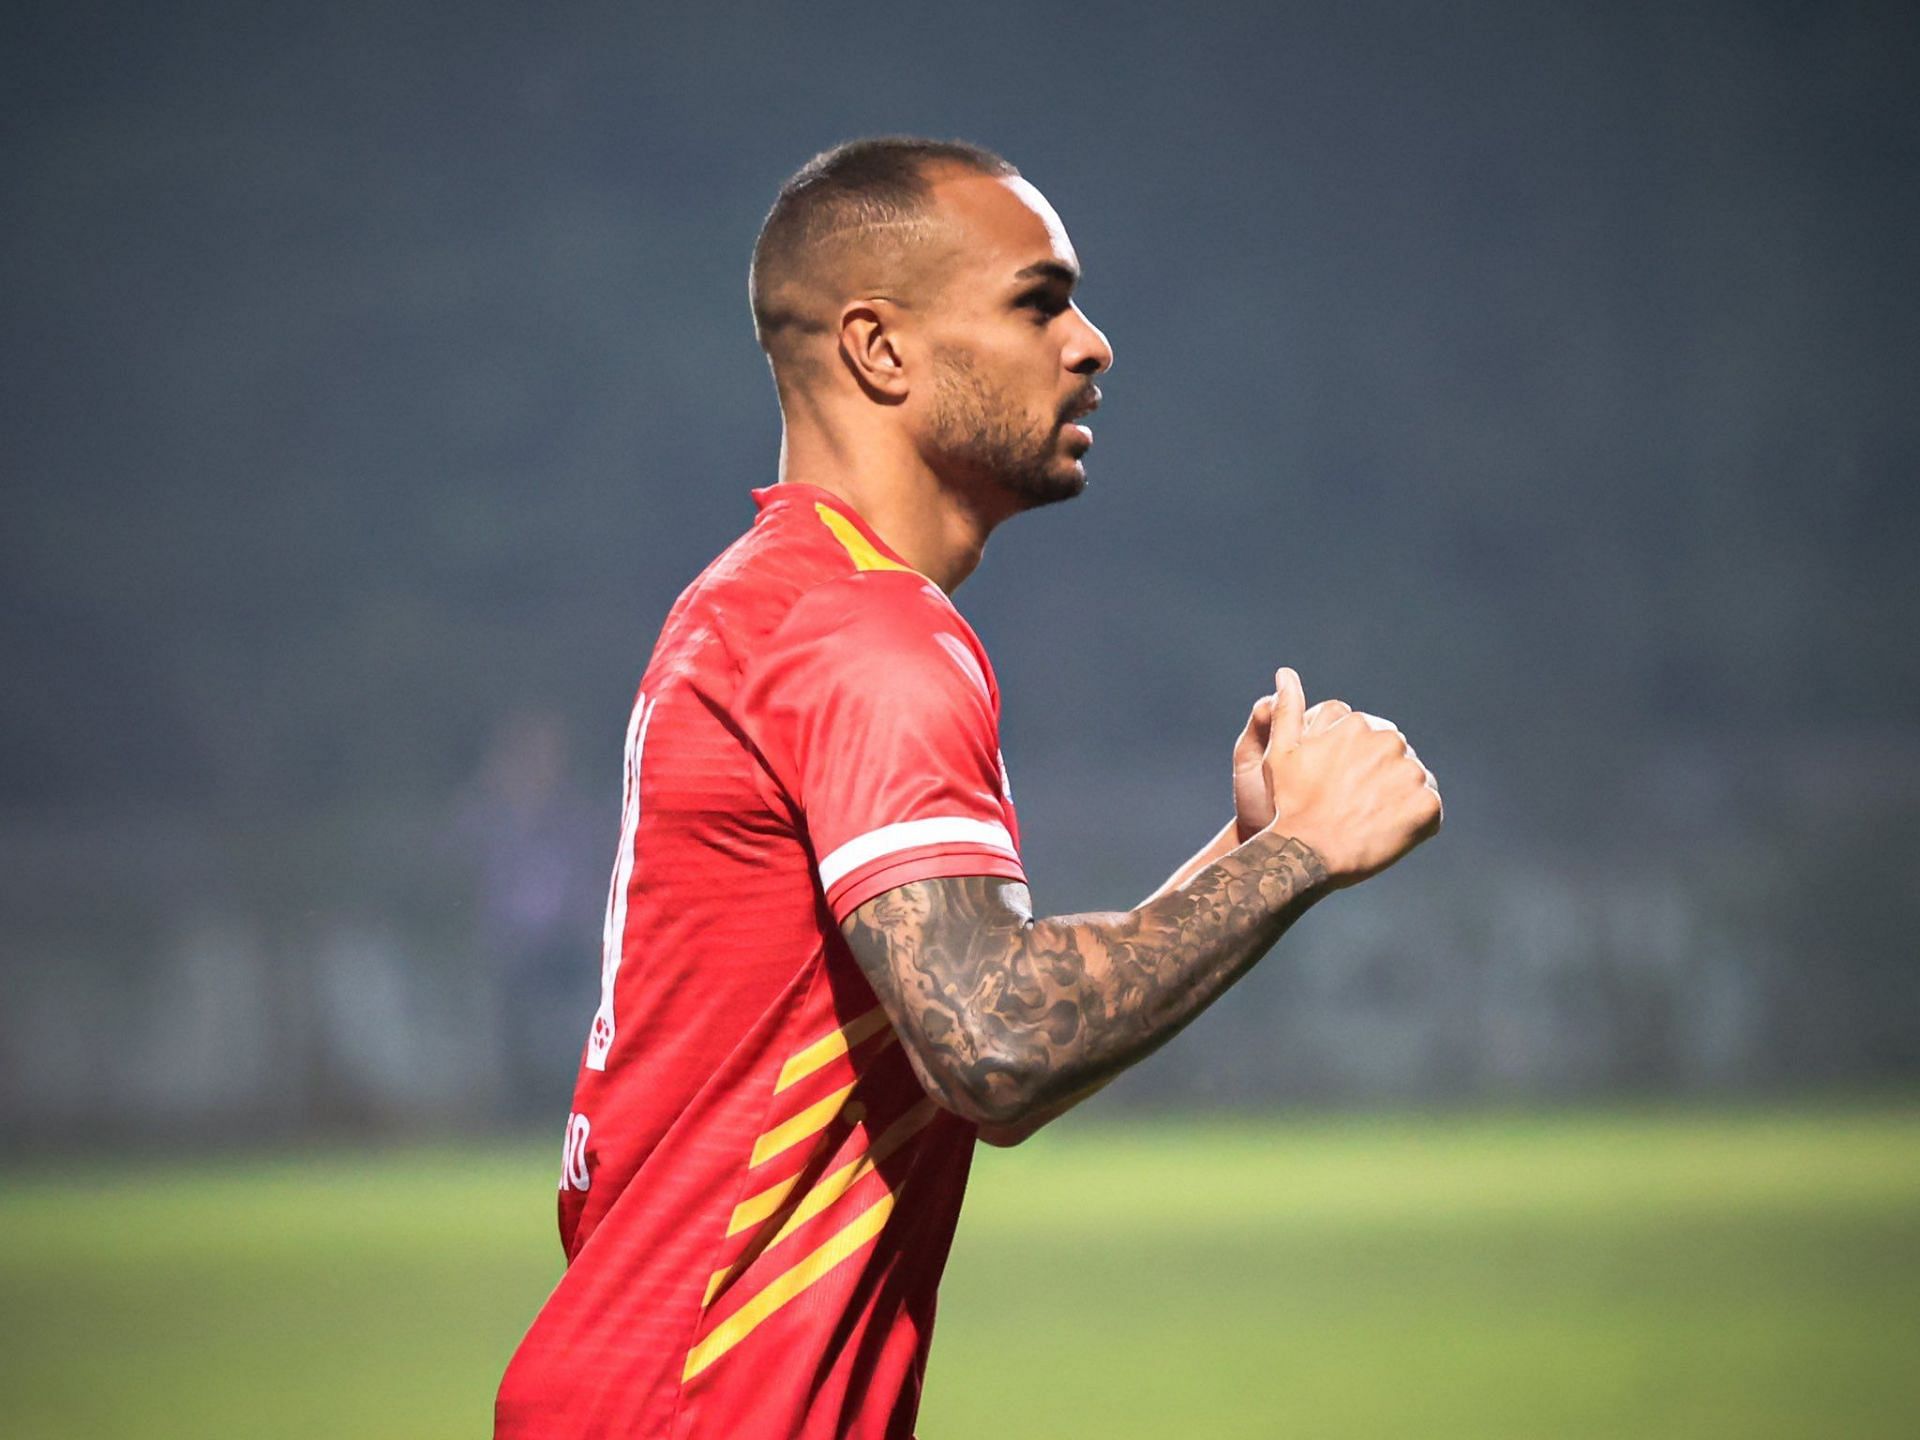 Felicio Brown scored in his debut for East Bengal FC.